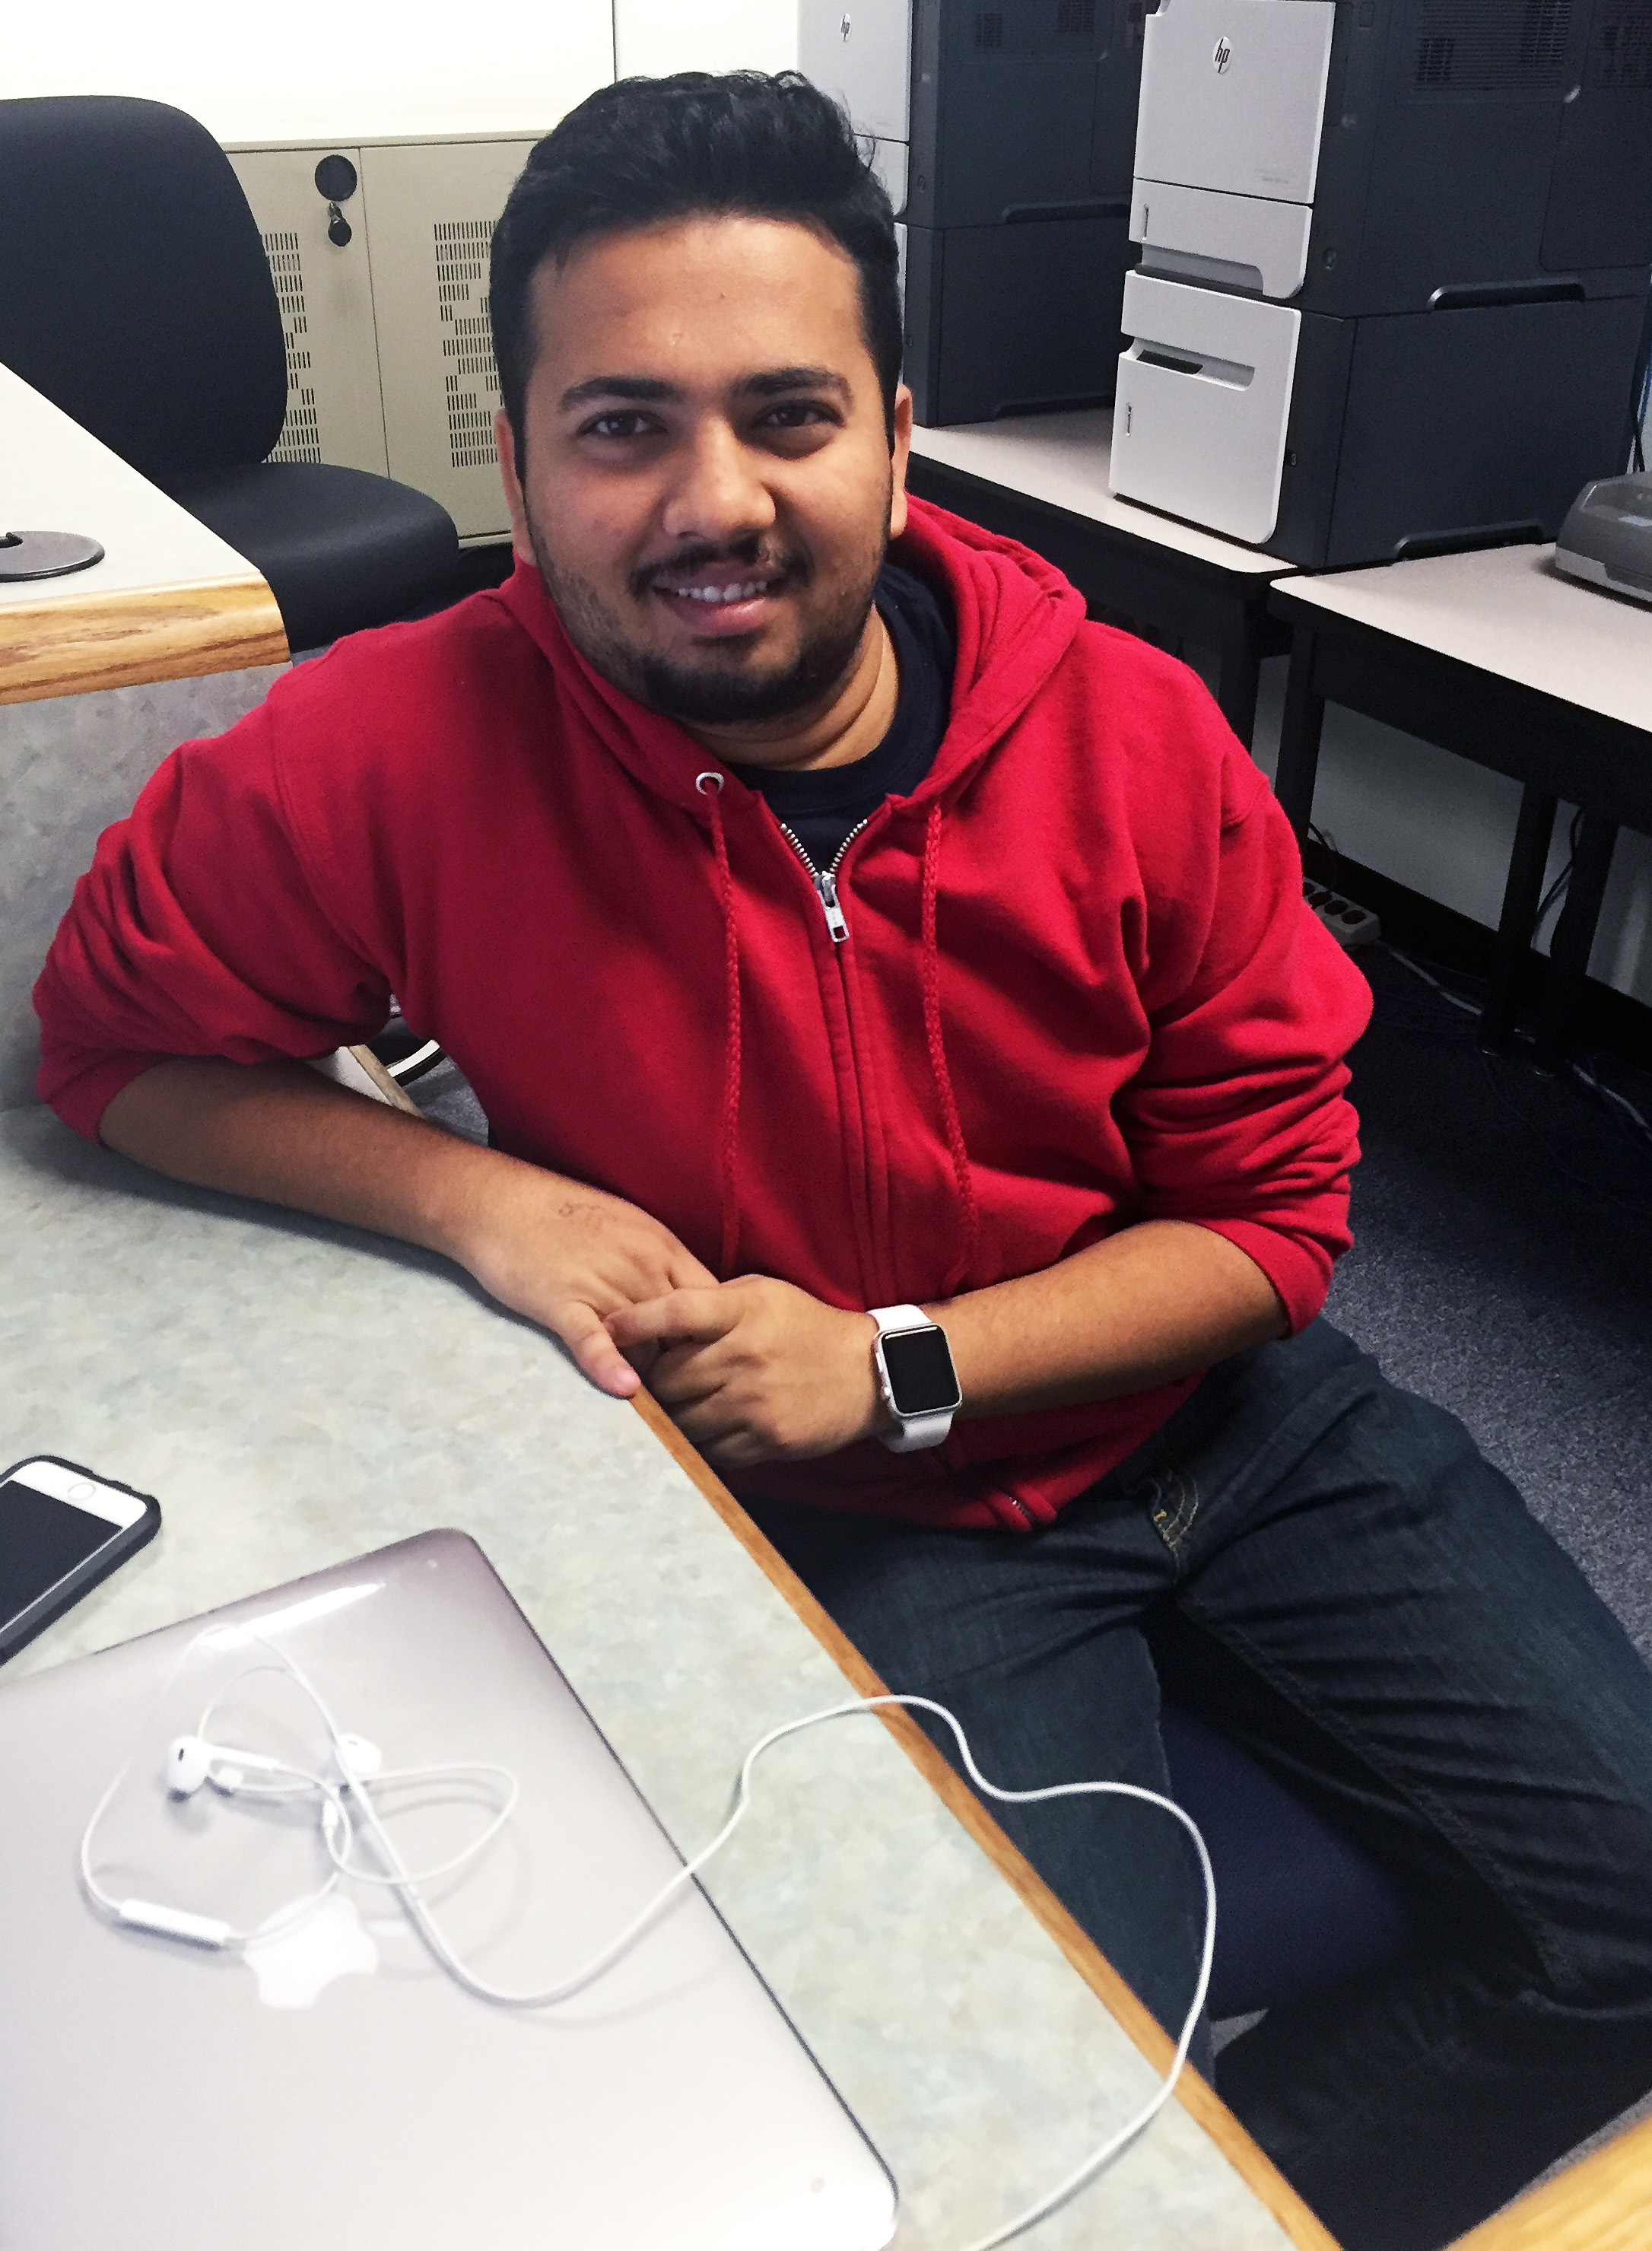 Image: Harsh Naik, business and healthcare administration graduate student, works behind the desk in the Bayou Building open computer lab. Photo by The Signal reporter Chelsea Colombo.